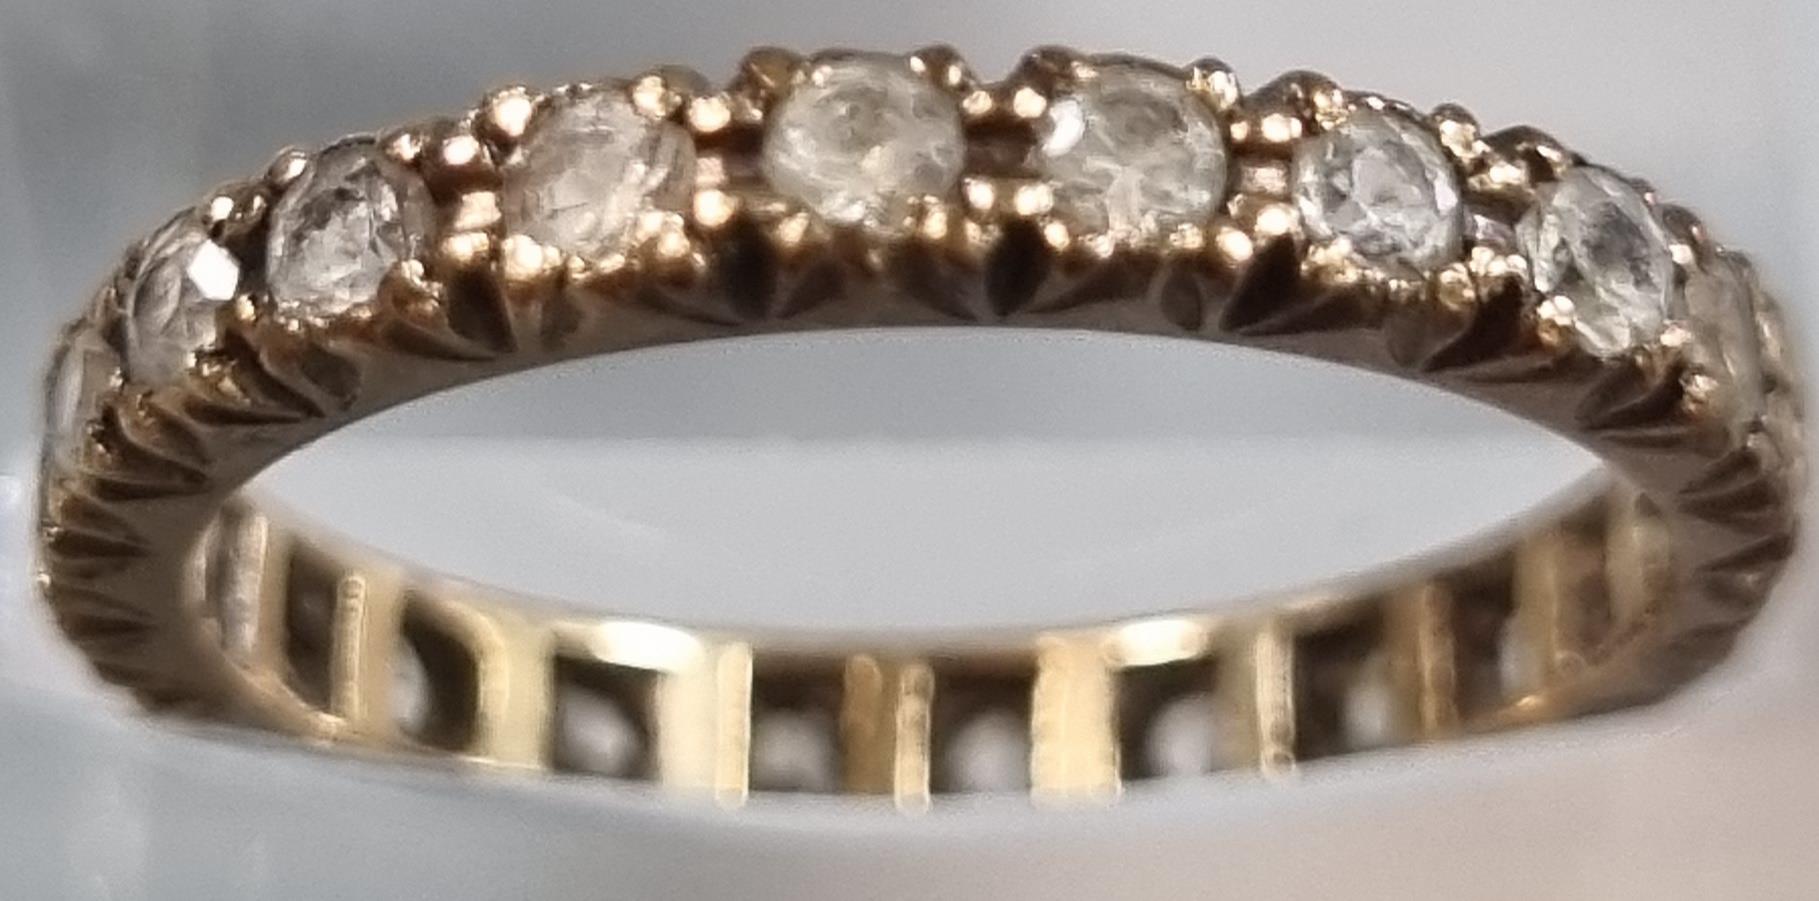 9ct gold full eternity style ring with white paste stones. 1.8g approx. Size M1/2. (B.P. 21% + VAT) - Image 2 of 4